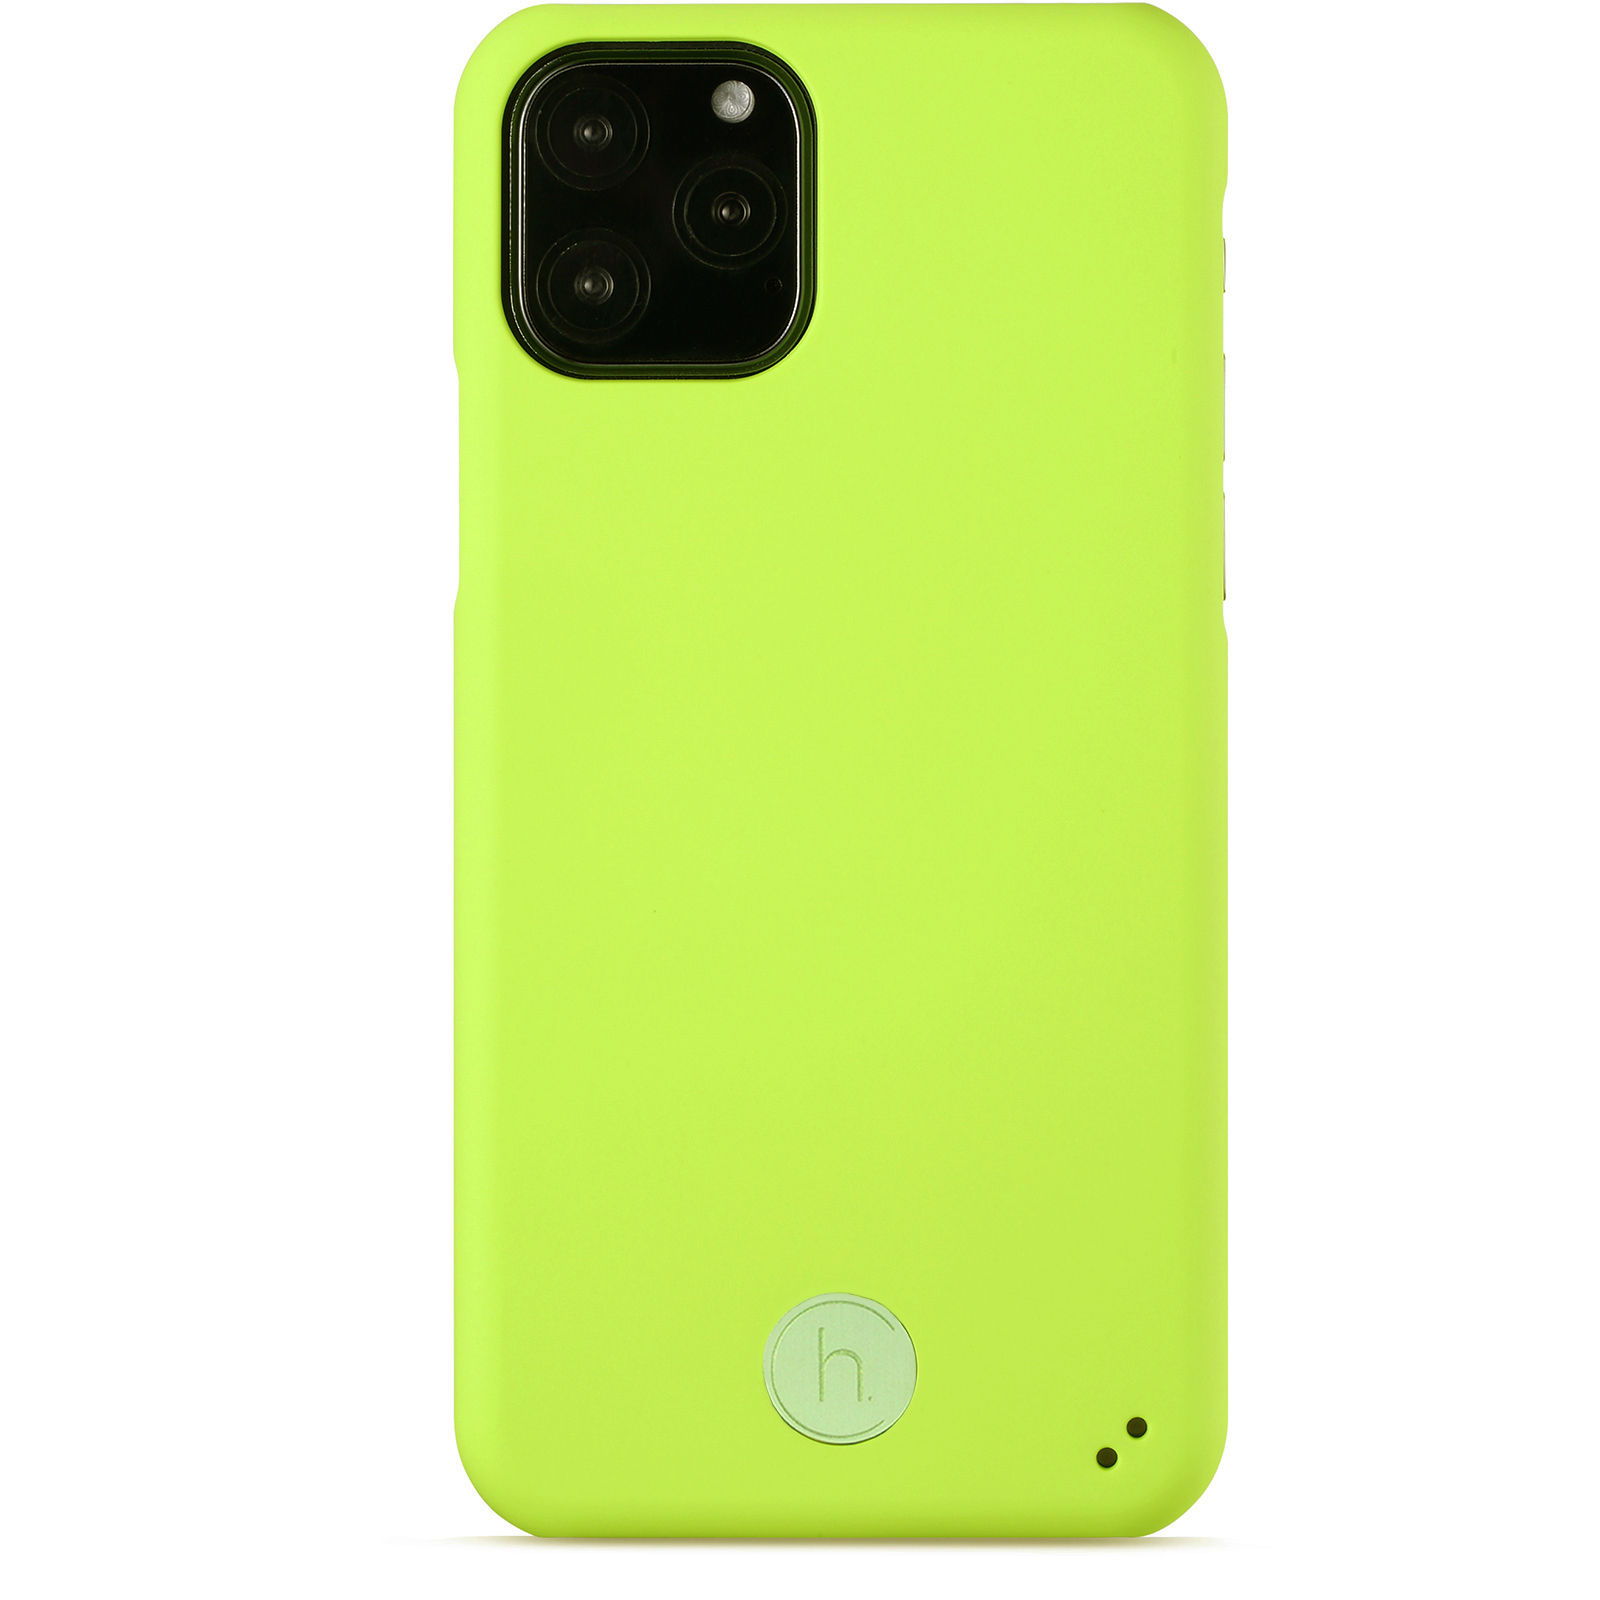 iPhone X/Xs/11 Pro, case connect, fluorescent yellow